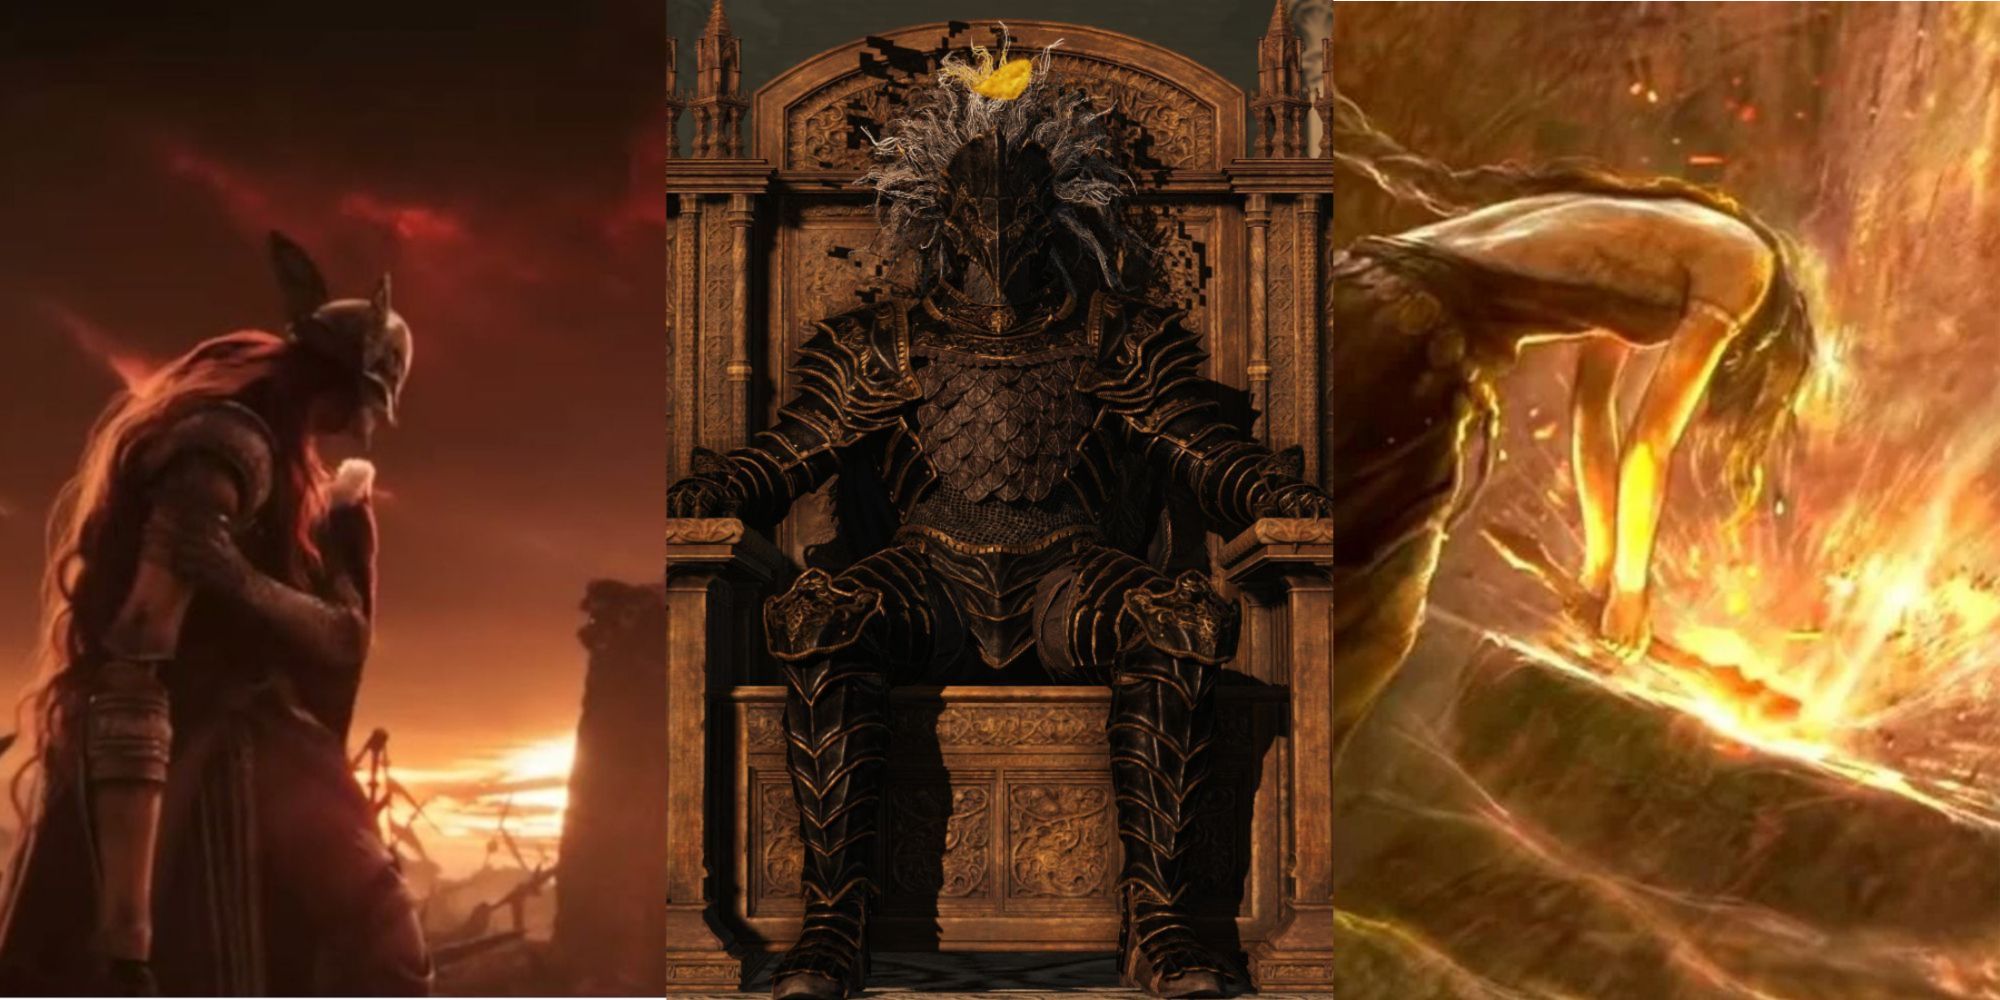 Malenia gripping her arm in Caelid during the reveal trailer, a Tarnished sitting upon the Throne during the ending, and artwork of Marika forging or shattering the Elden Ring, left to right